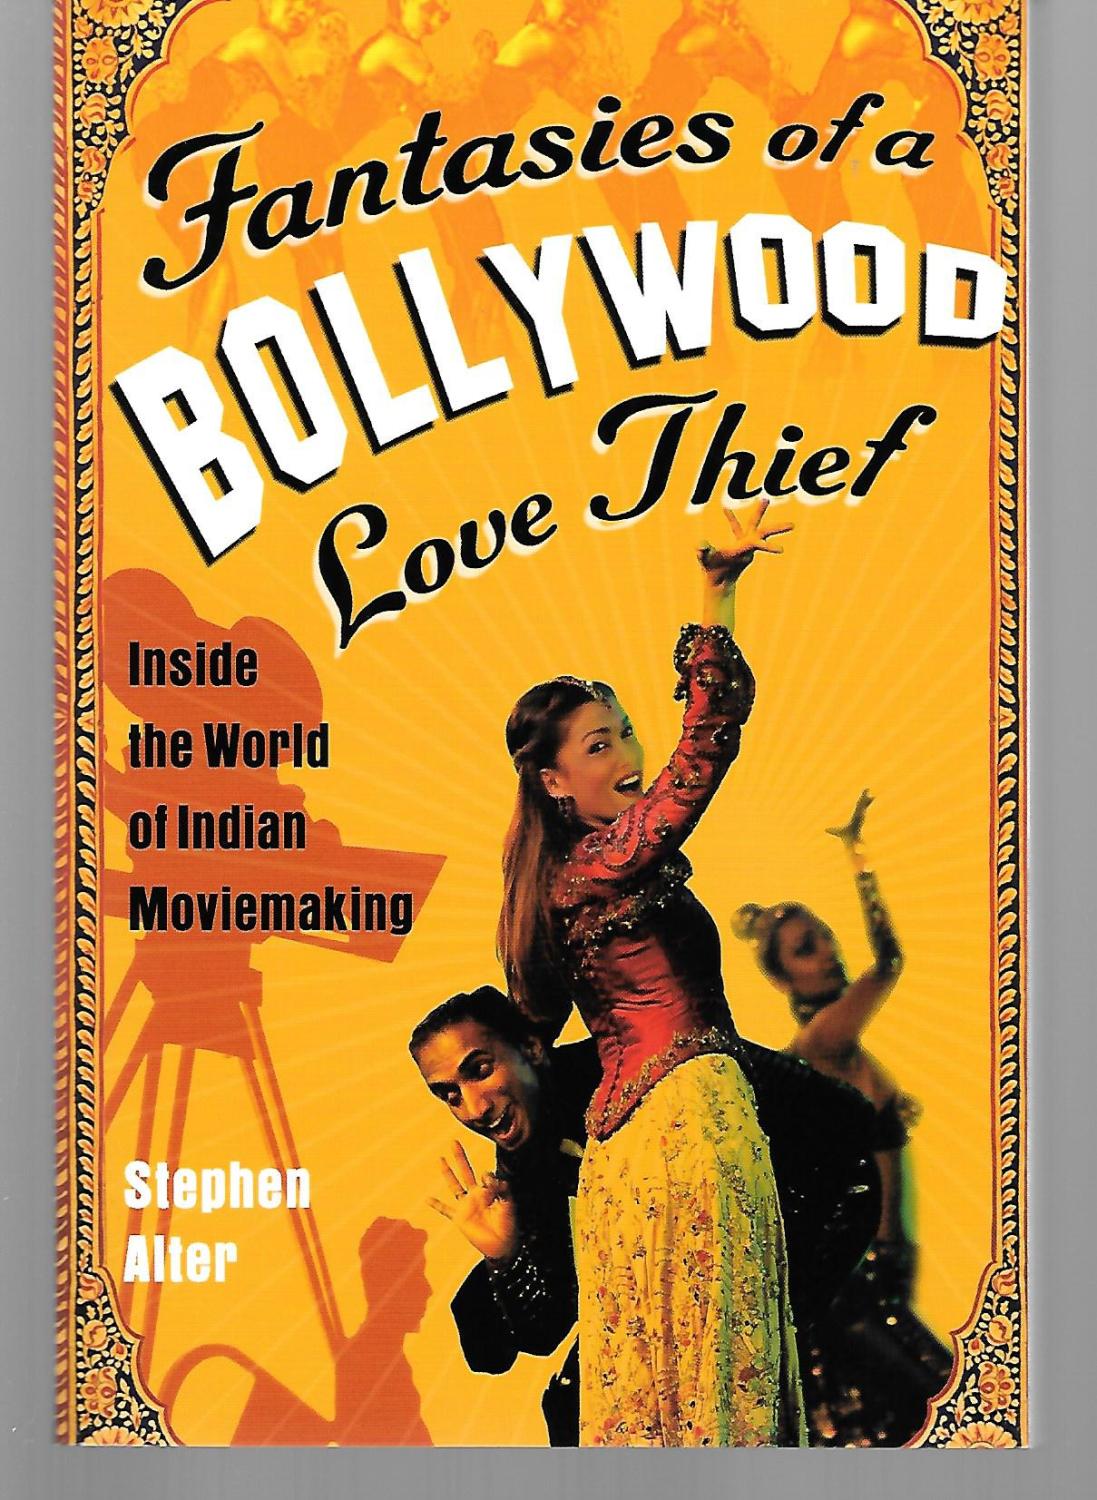 Fantasies Of A Bollywood Love Thief ( Inside The World Of Indian Moviemaking ) - Stephen Alter